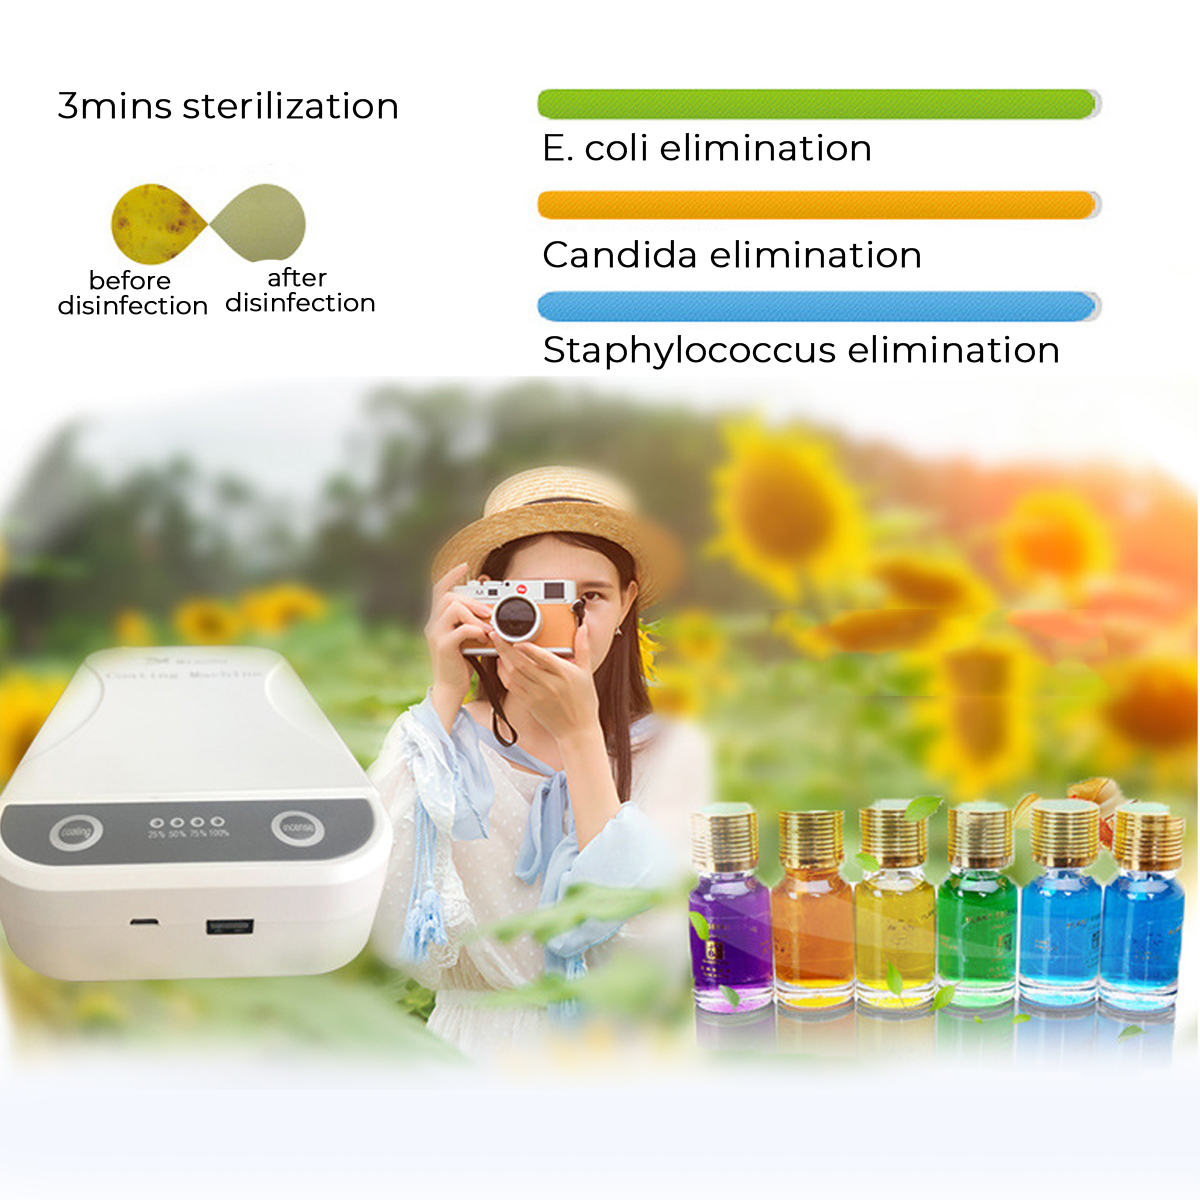 Multifunction-Double-UV-Phone-Watch-Disinfection-Sterilizer-Box-Face-Mask-Jewelry-Phones-Cleaner-wit-1658028-6